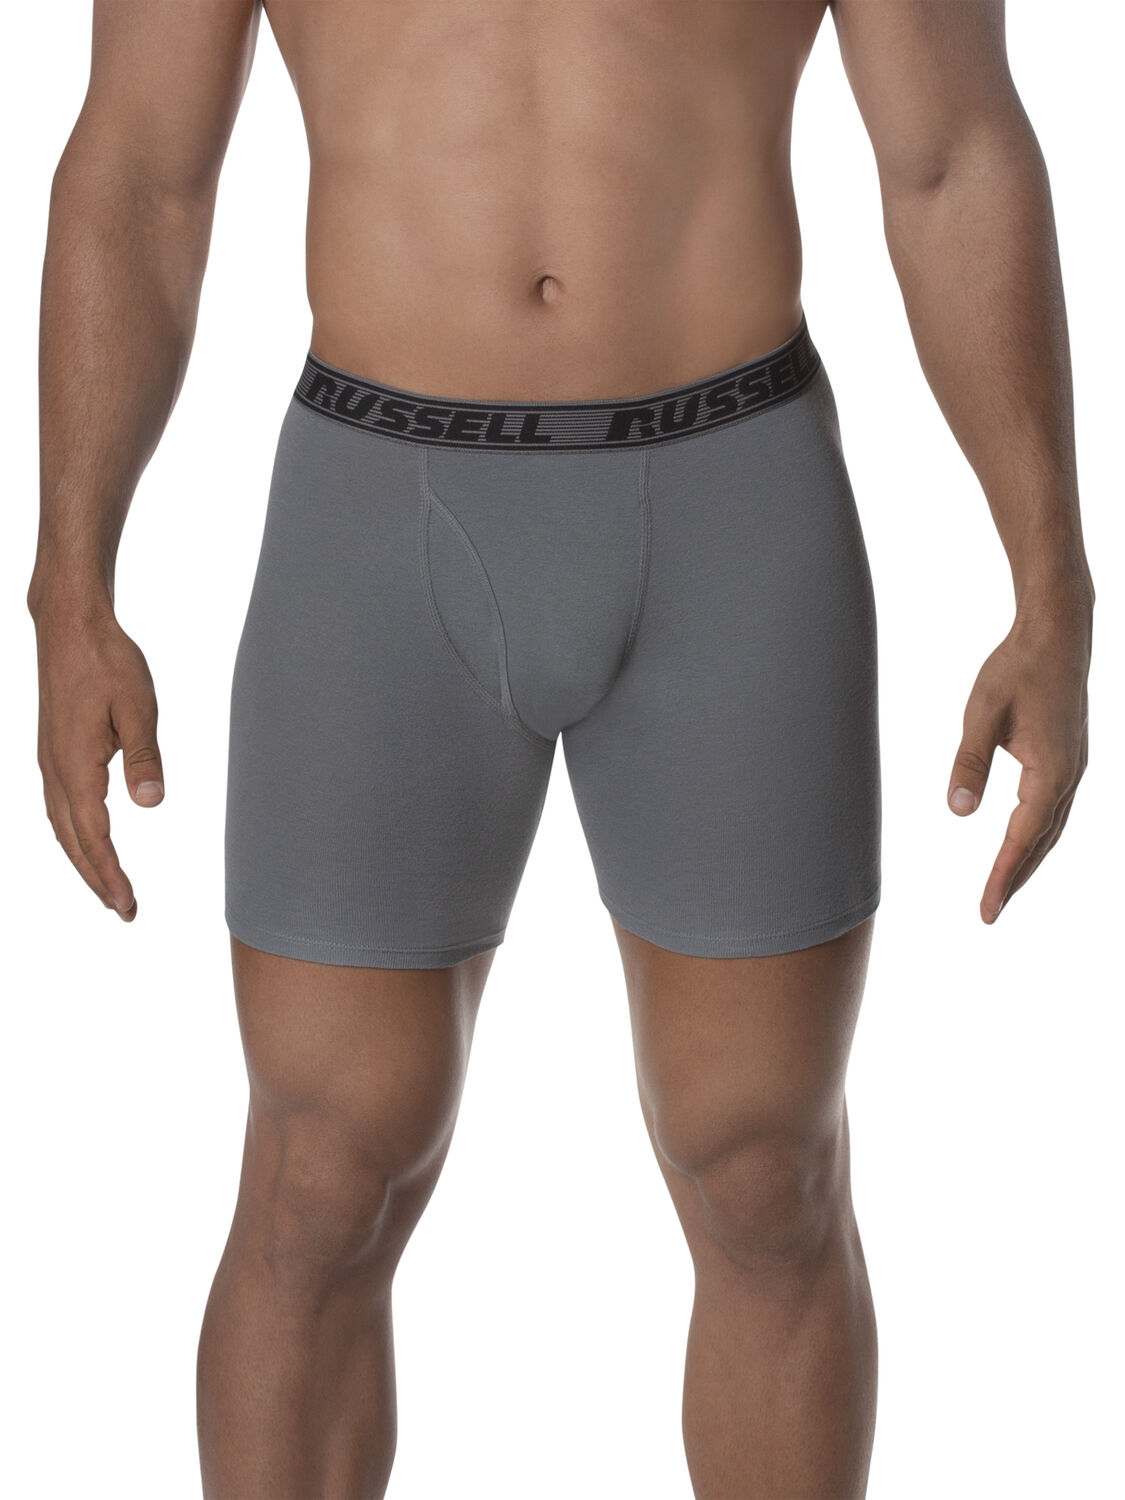 Russell Athletic Men's Renault Boxer Brief 4 Pack